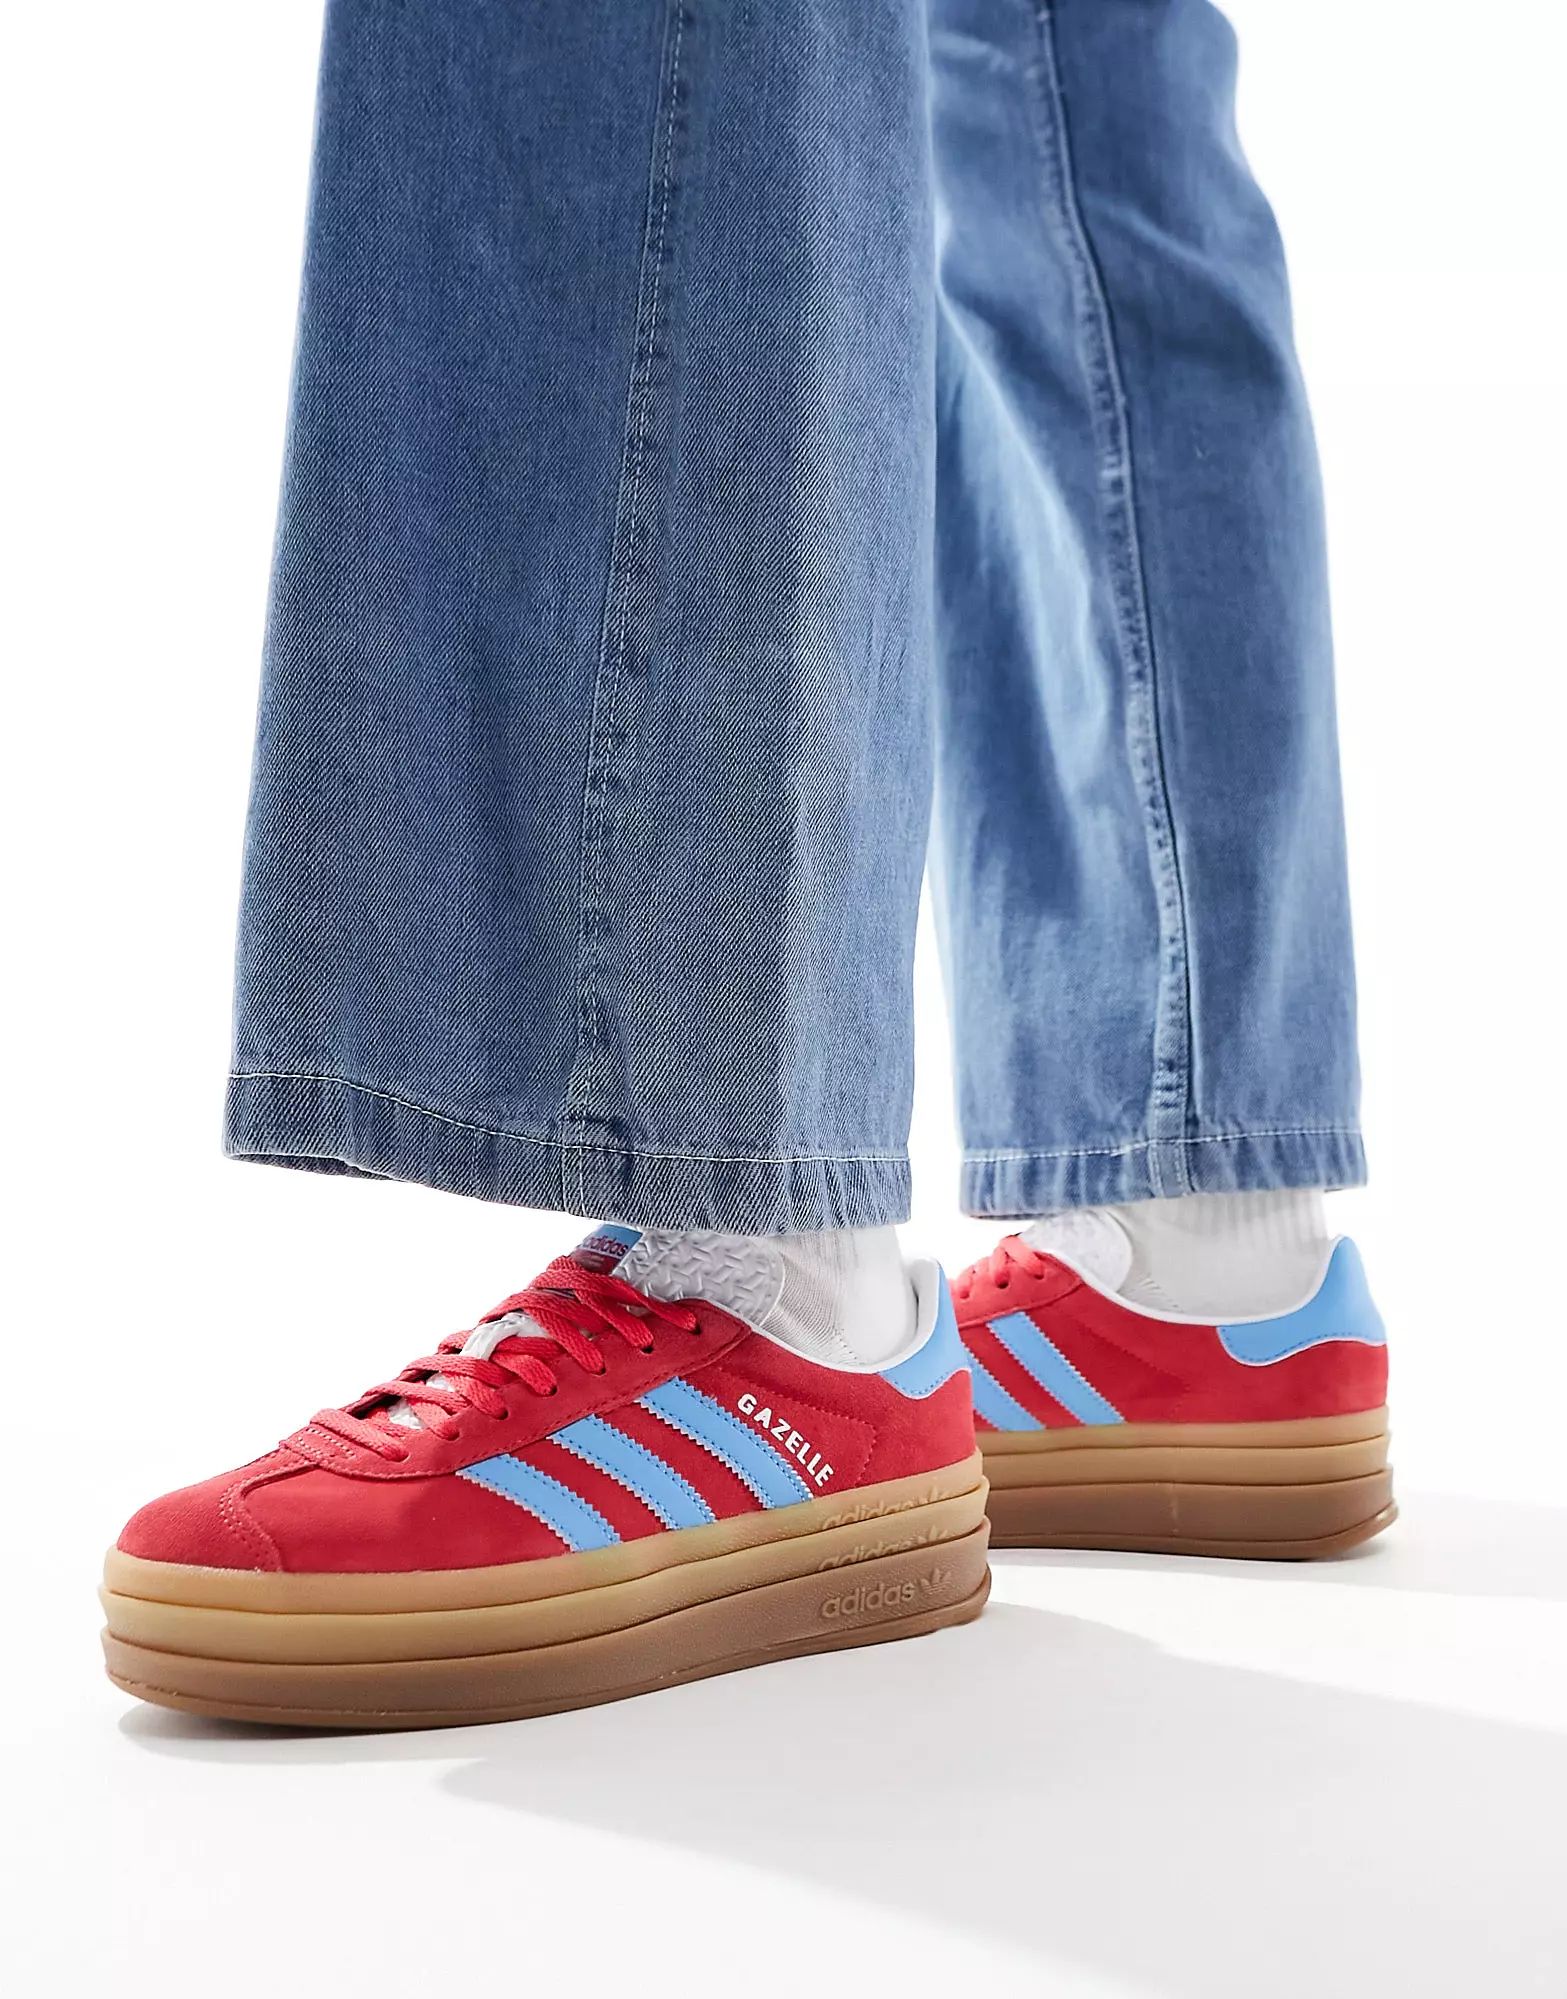 adidas Originals Gazelle Bold trainers in red and blue | ASOS (Global)